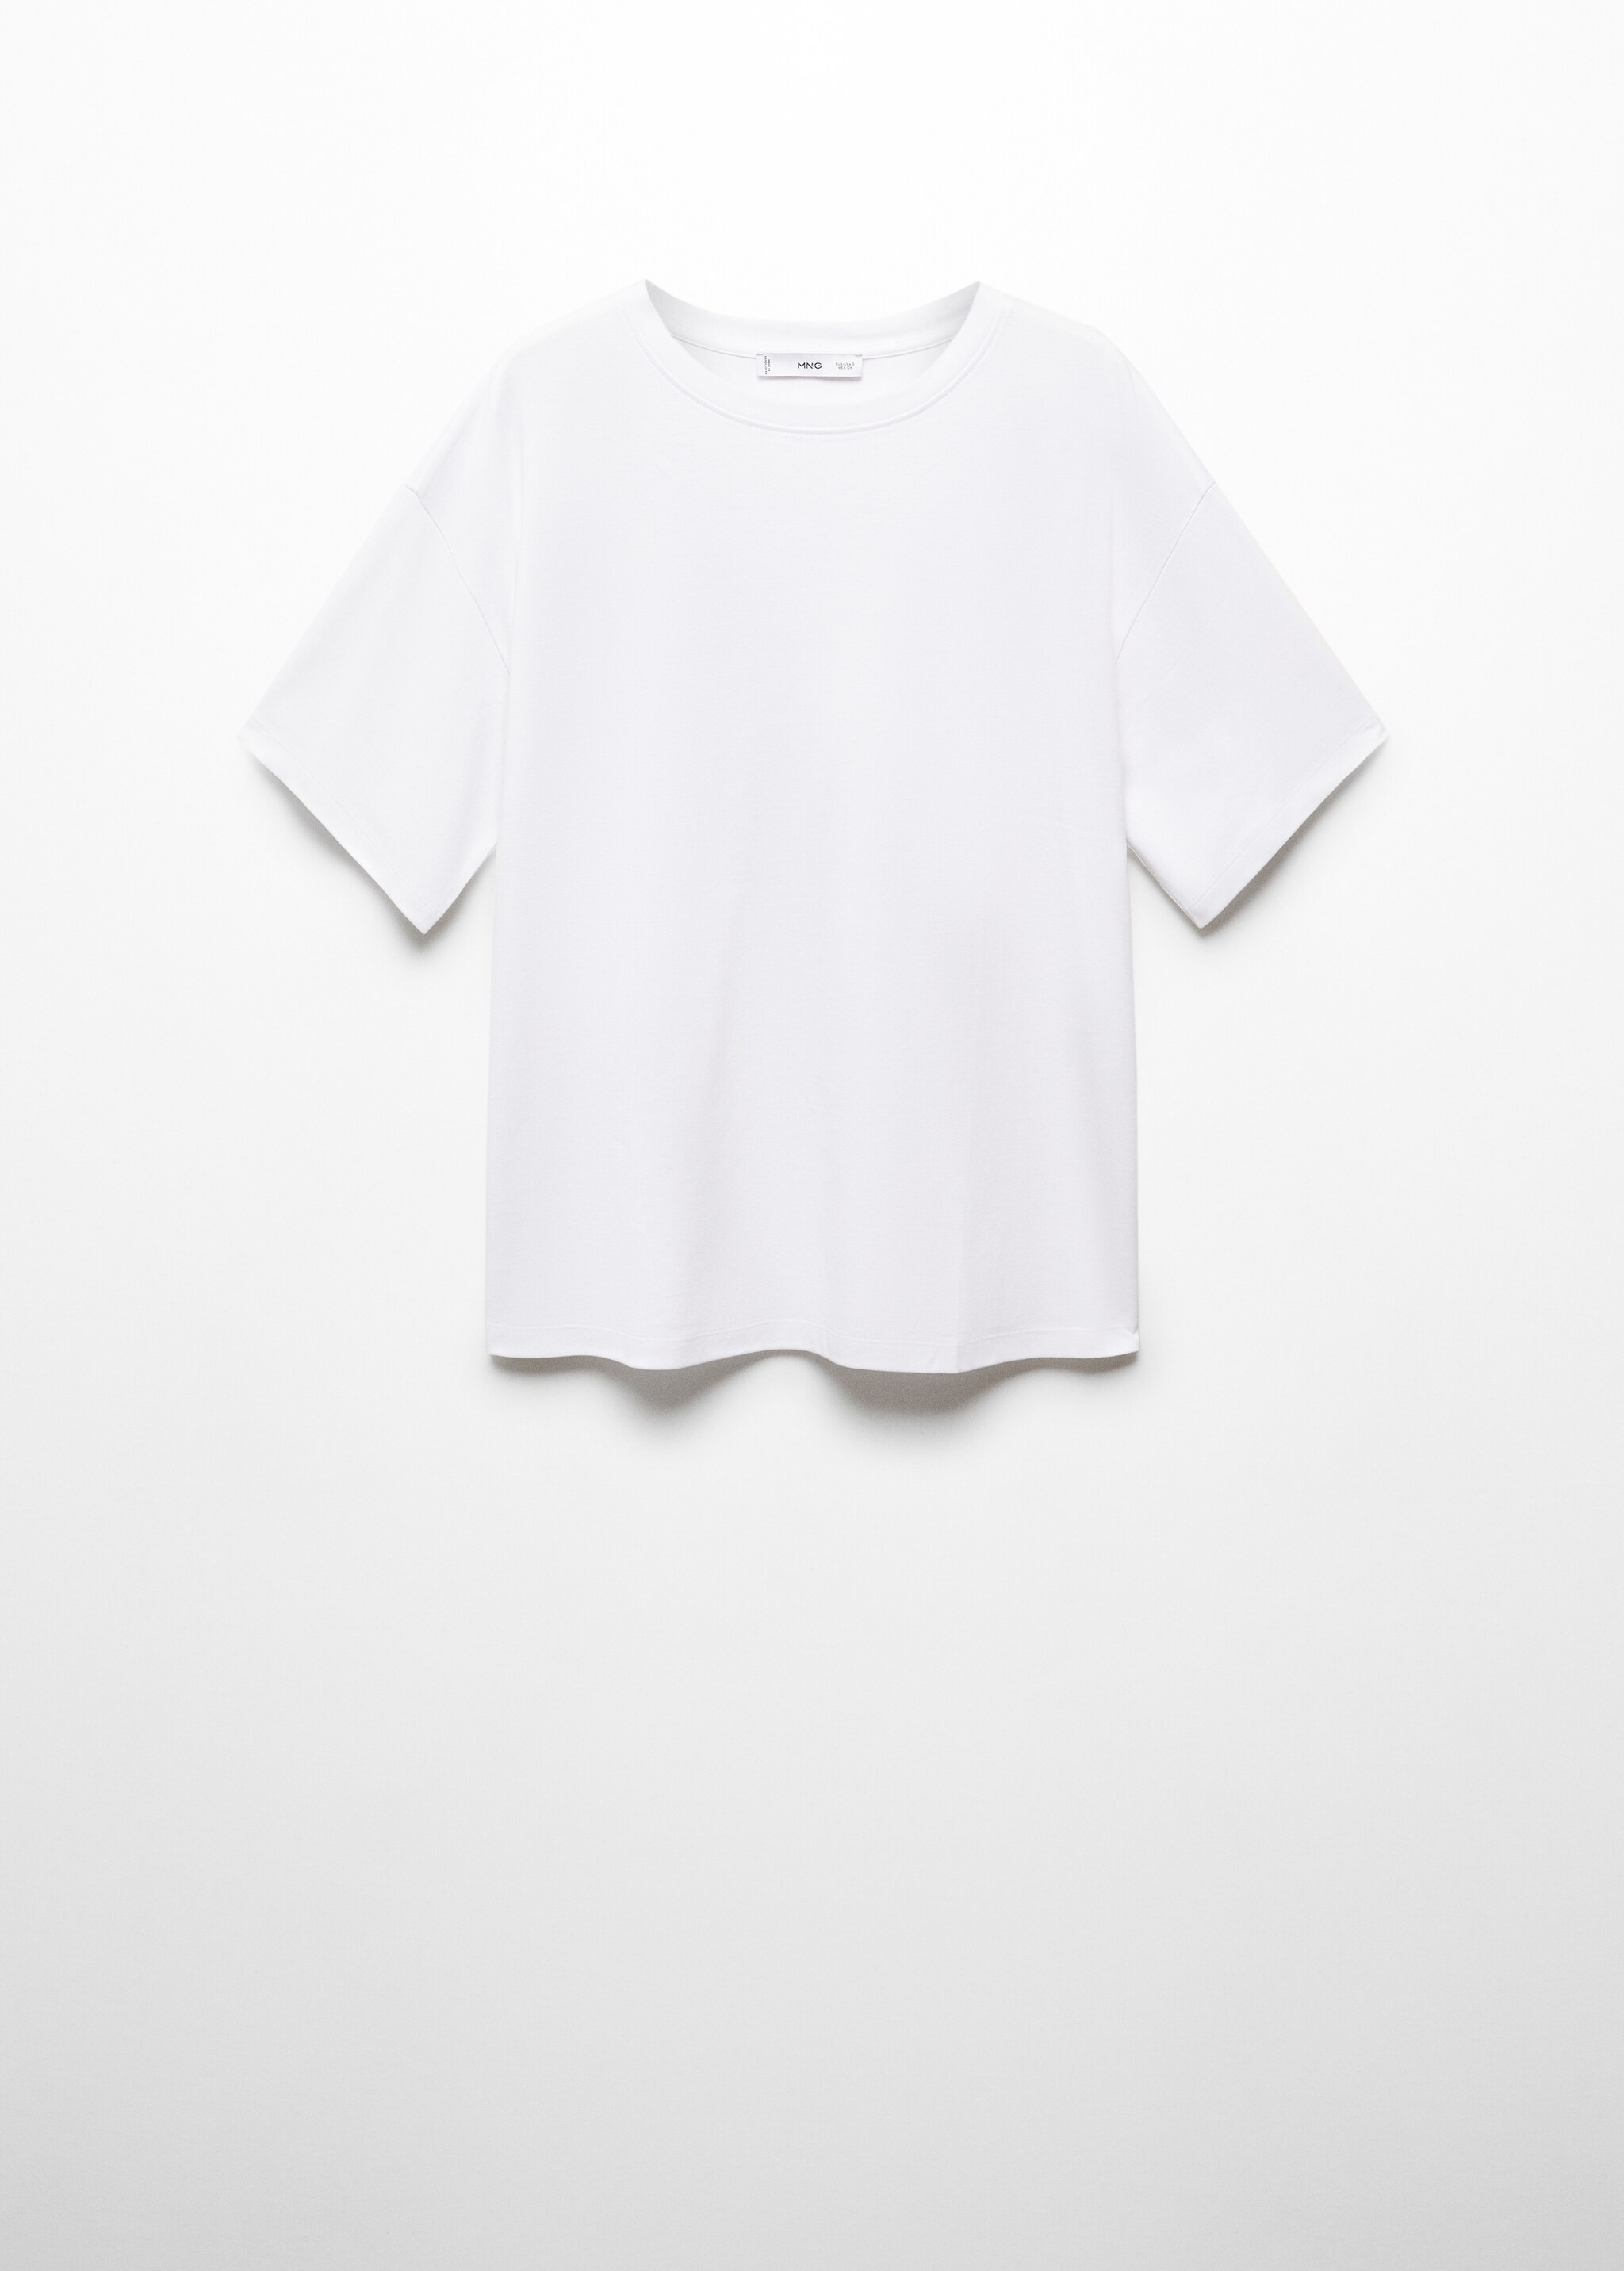 100% cotton oversized T-shirt - Article without model